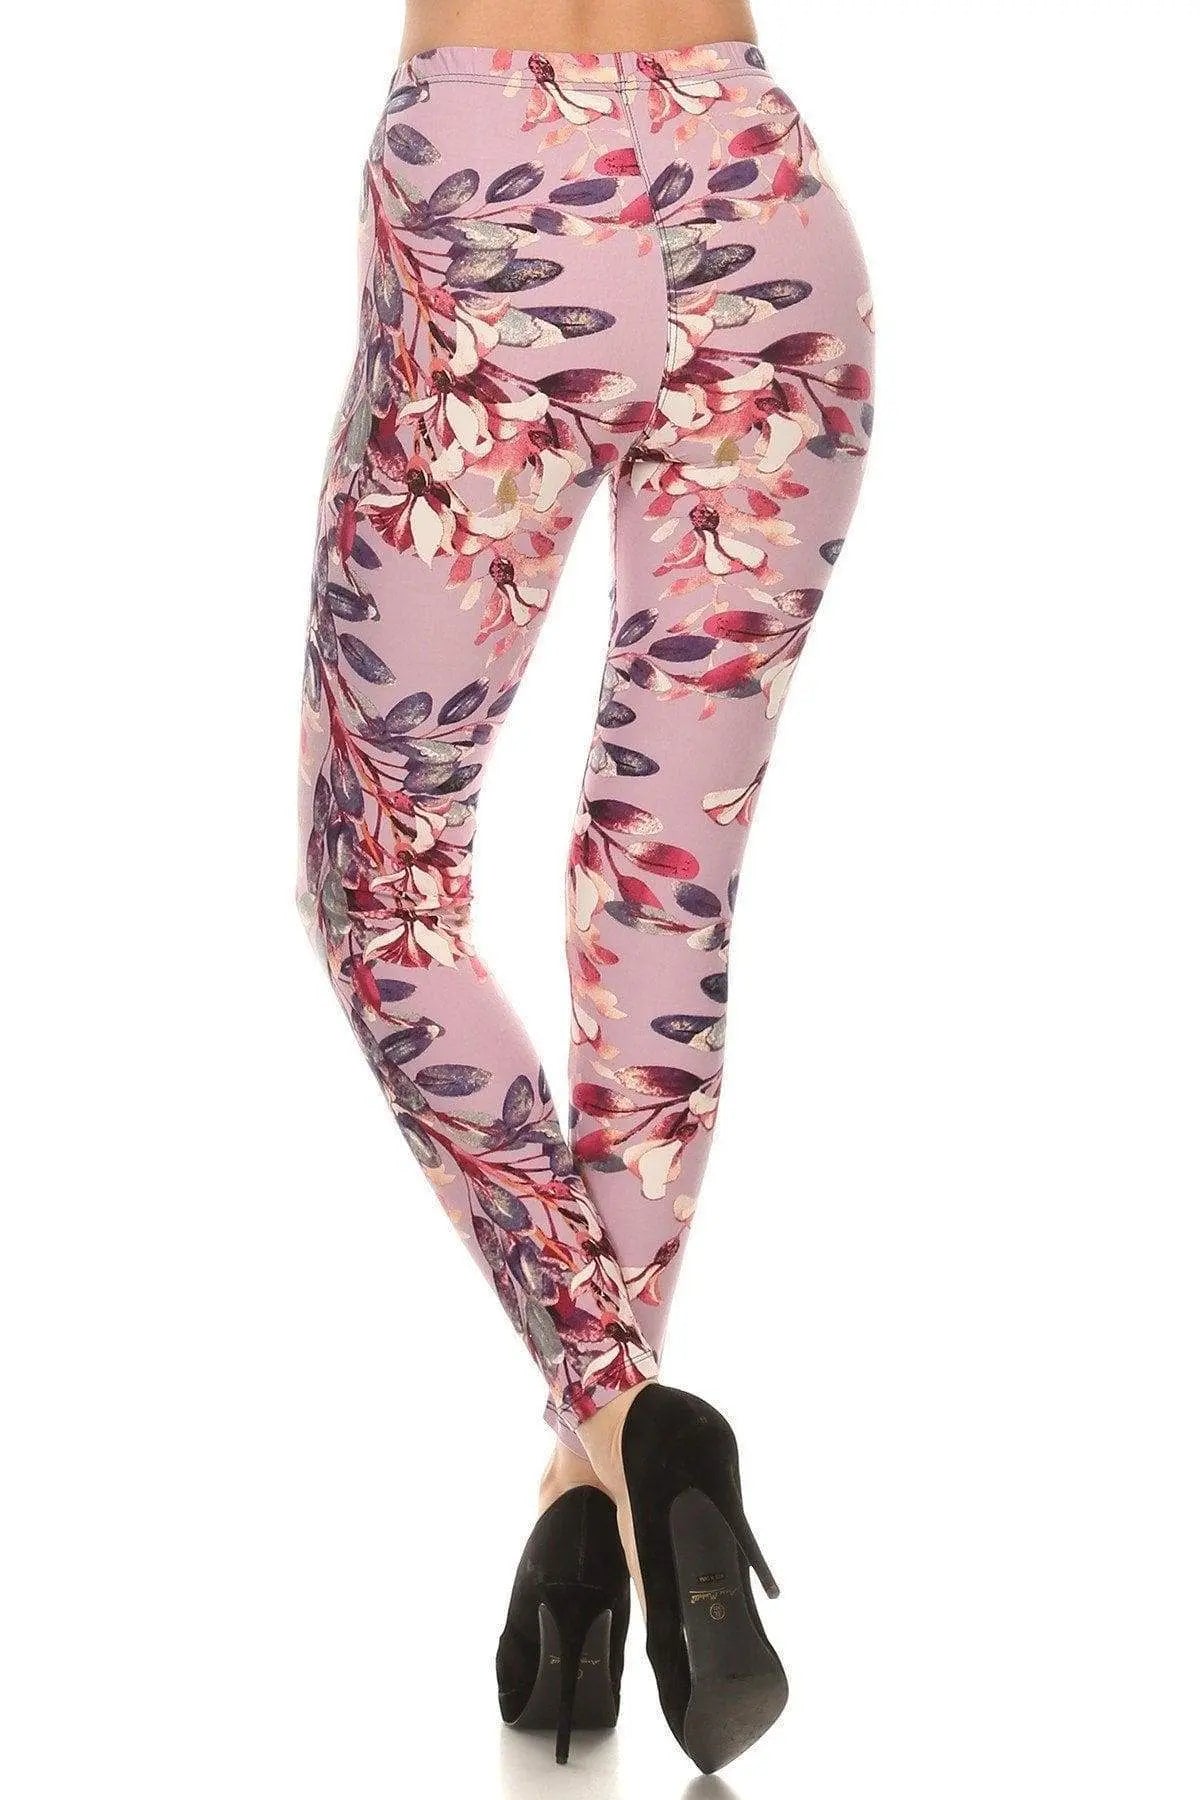 Floral Printed High-Waisted Knit Leggings In Skinny Fit With Elastic Waistband Blue Zone Planet